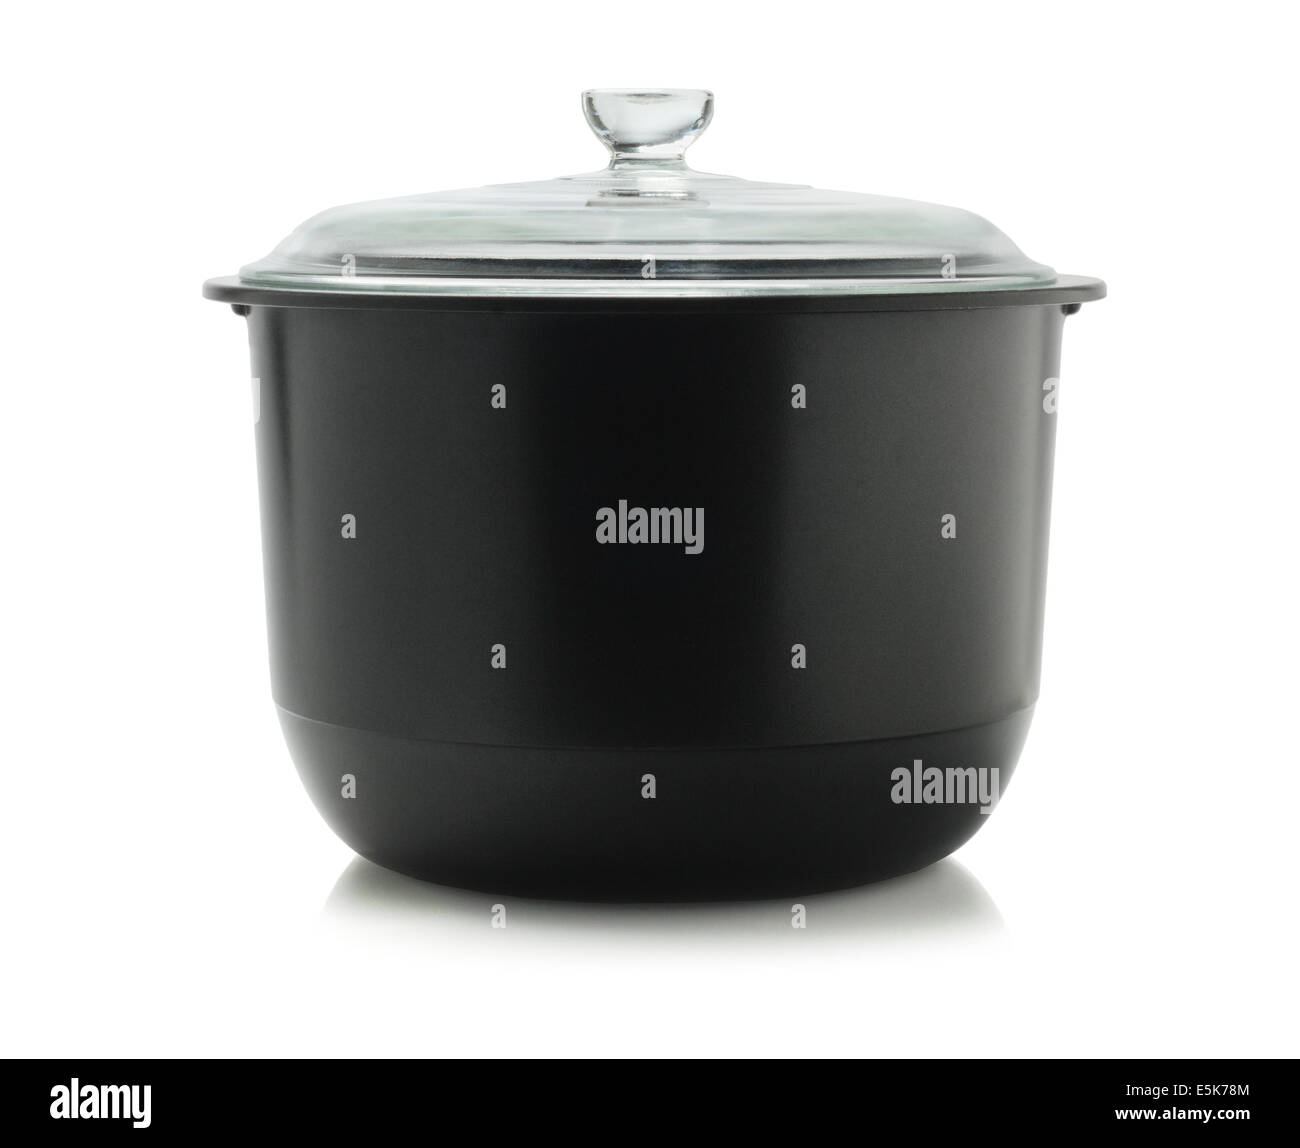 Black Cooking Pot With Glass Lid On White Background Stock Photo